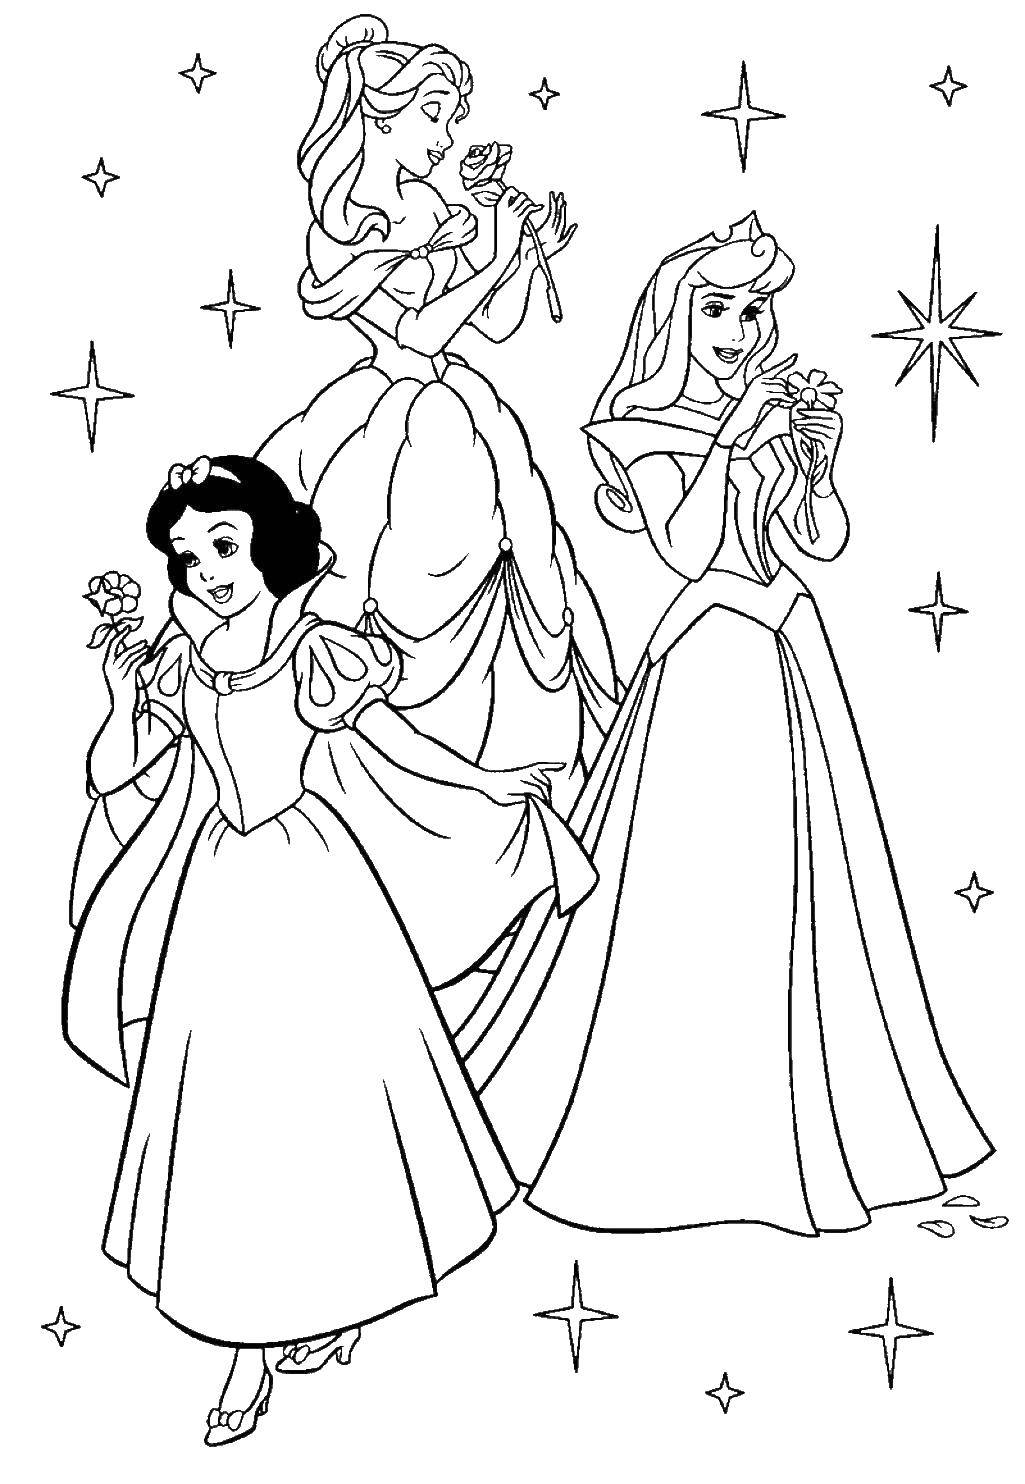 Coloring Sleeping beauty, Belle and snow white. Category cartoons. Tags:  Disney, Princess.